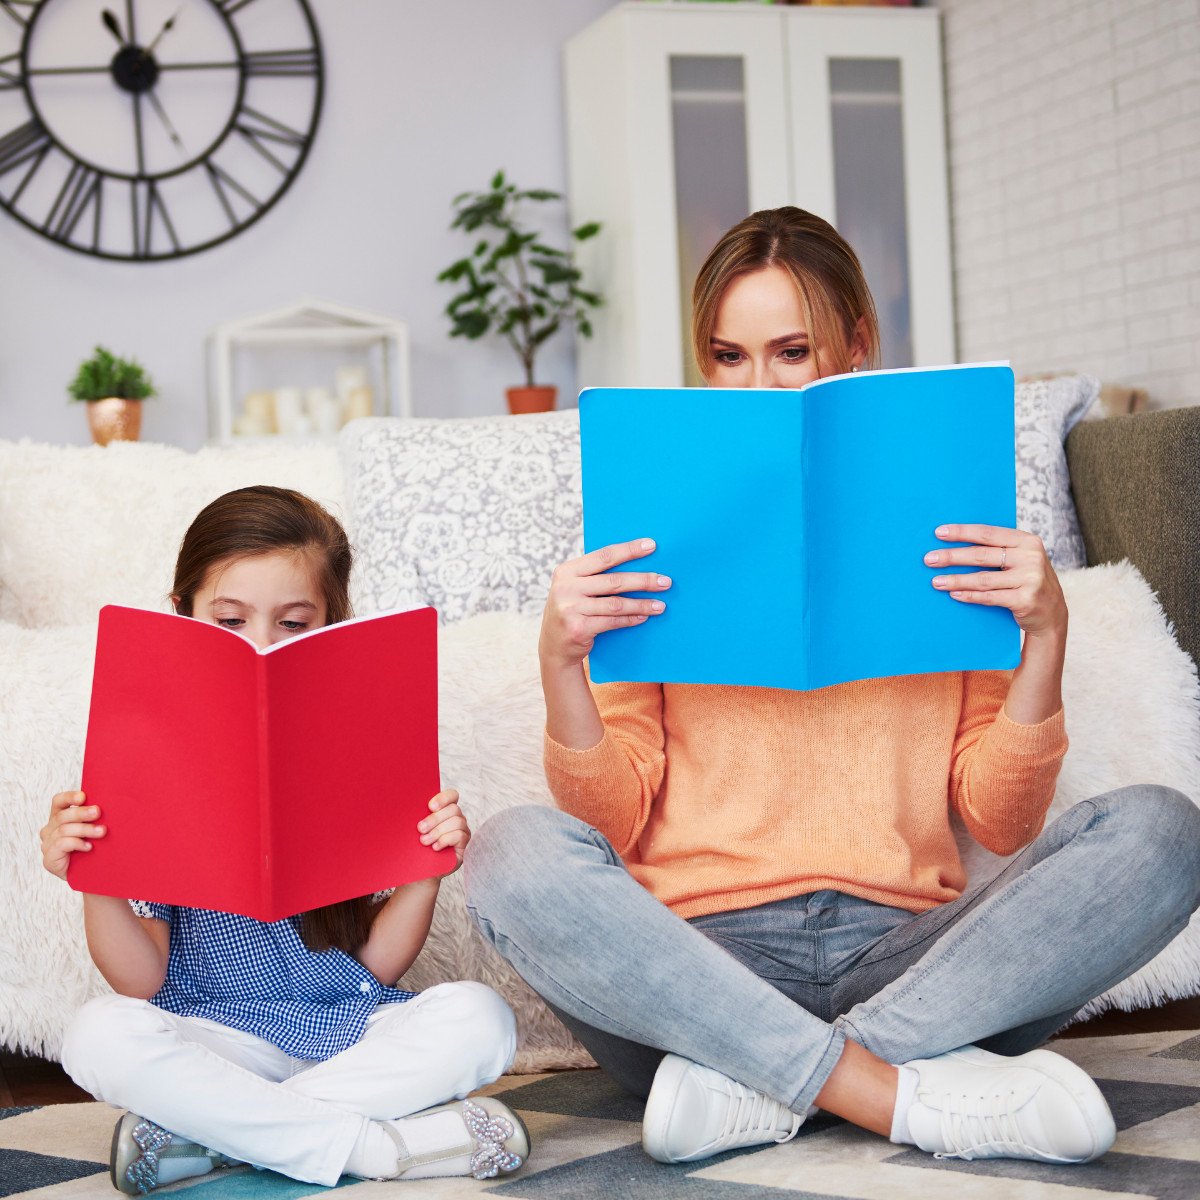 woman and child reading books